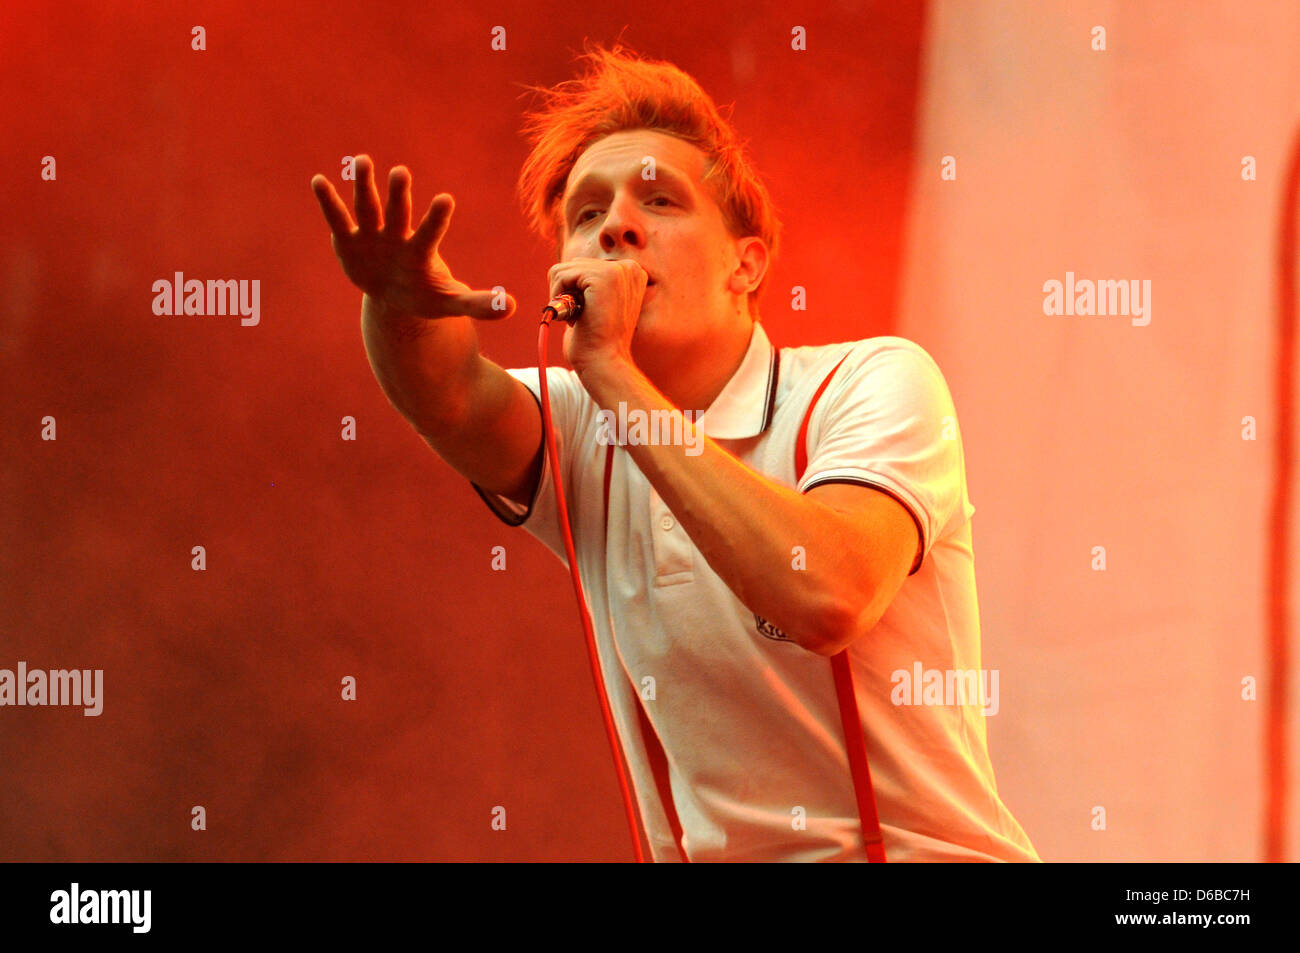 Felix Brummer (Felix Kummer) of the German band Kraftklub perfroms on stage at the Veltins-Arena in Gelsenkirchen, Germany, 25 August 2012. Tens of thousands of people attended the one-day festival 'Rock im Pott'. Photo: Jan Knoff Stock Photo